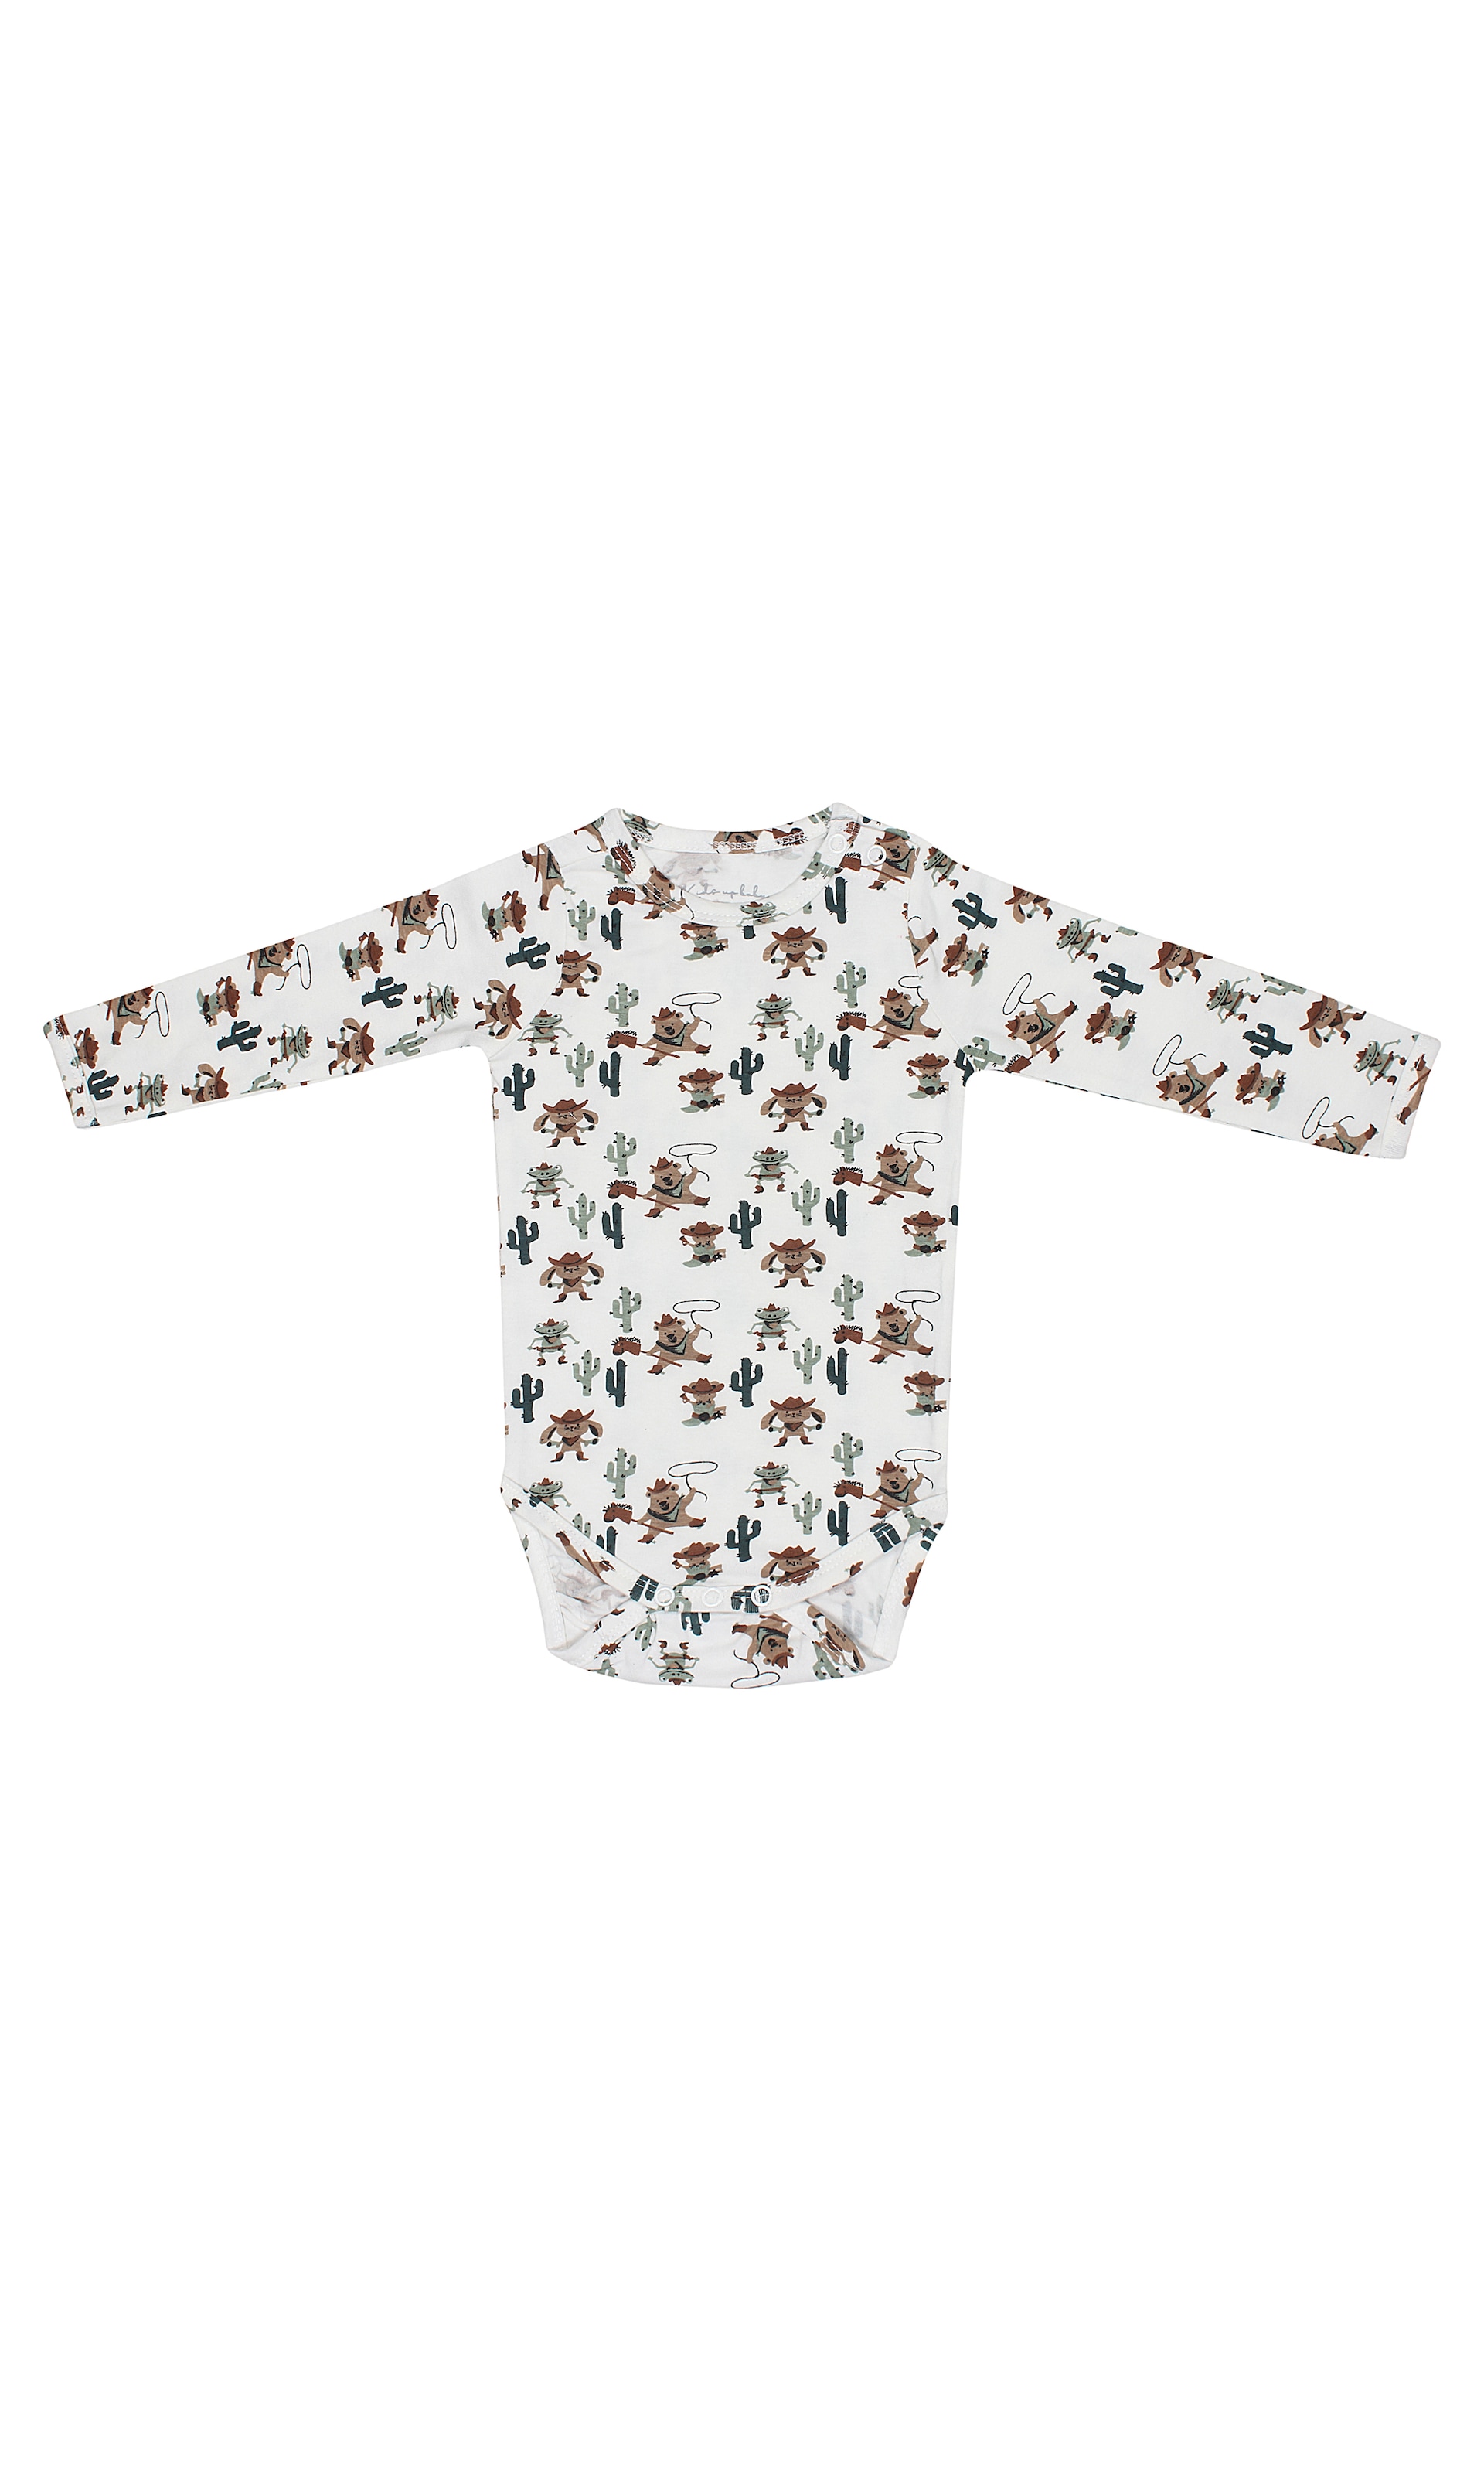 Kids Up Barboteuse / Body 'wilmer' 50 Blanc